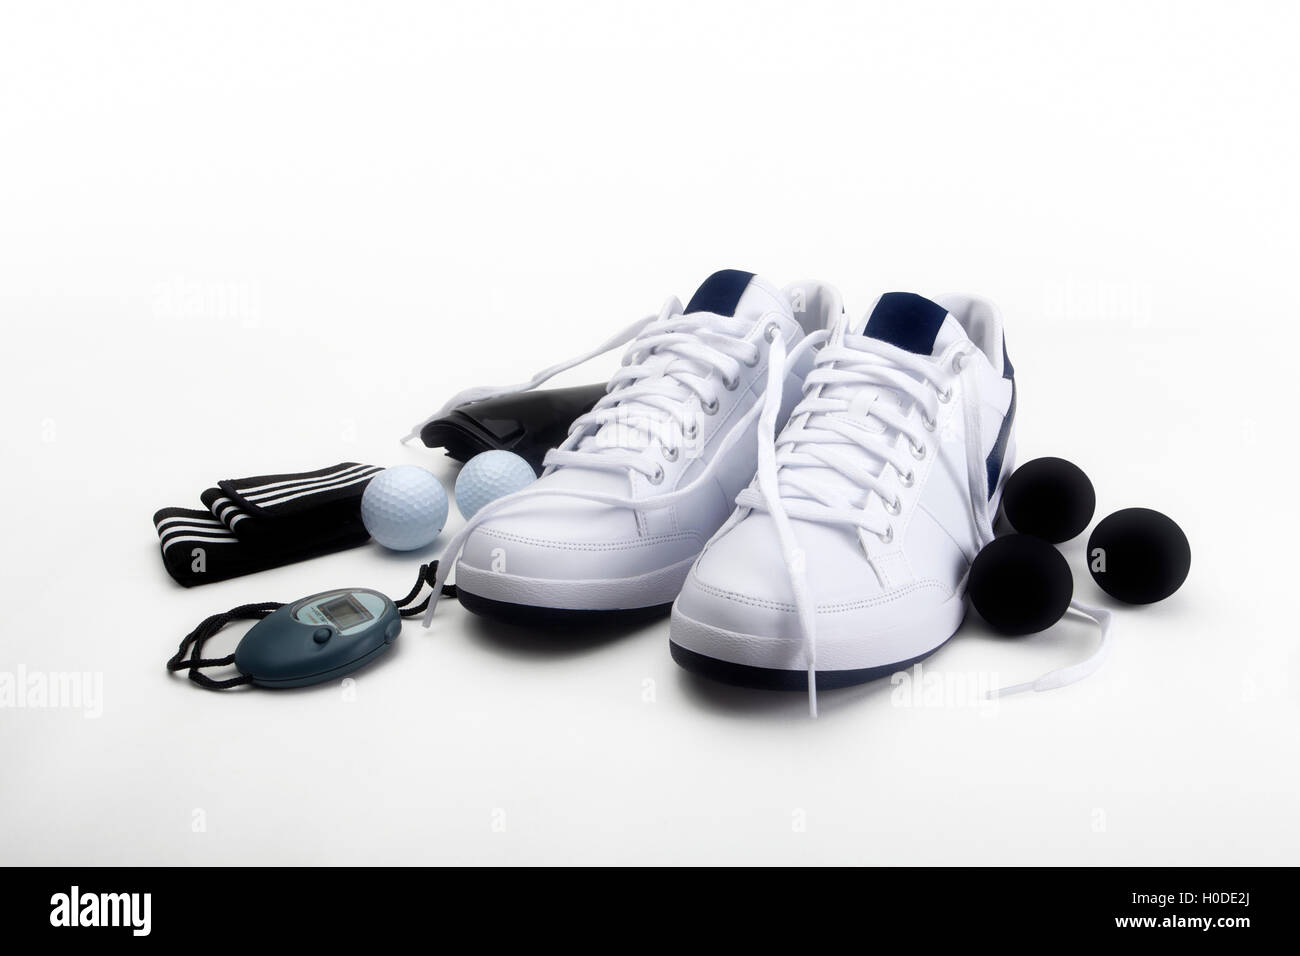 Sports shoes and various training/exercise items,including trainers, squash balls, stopwatch, golf balls, wrist bands Stock Photo